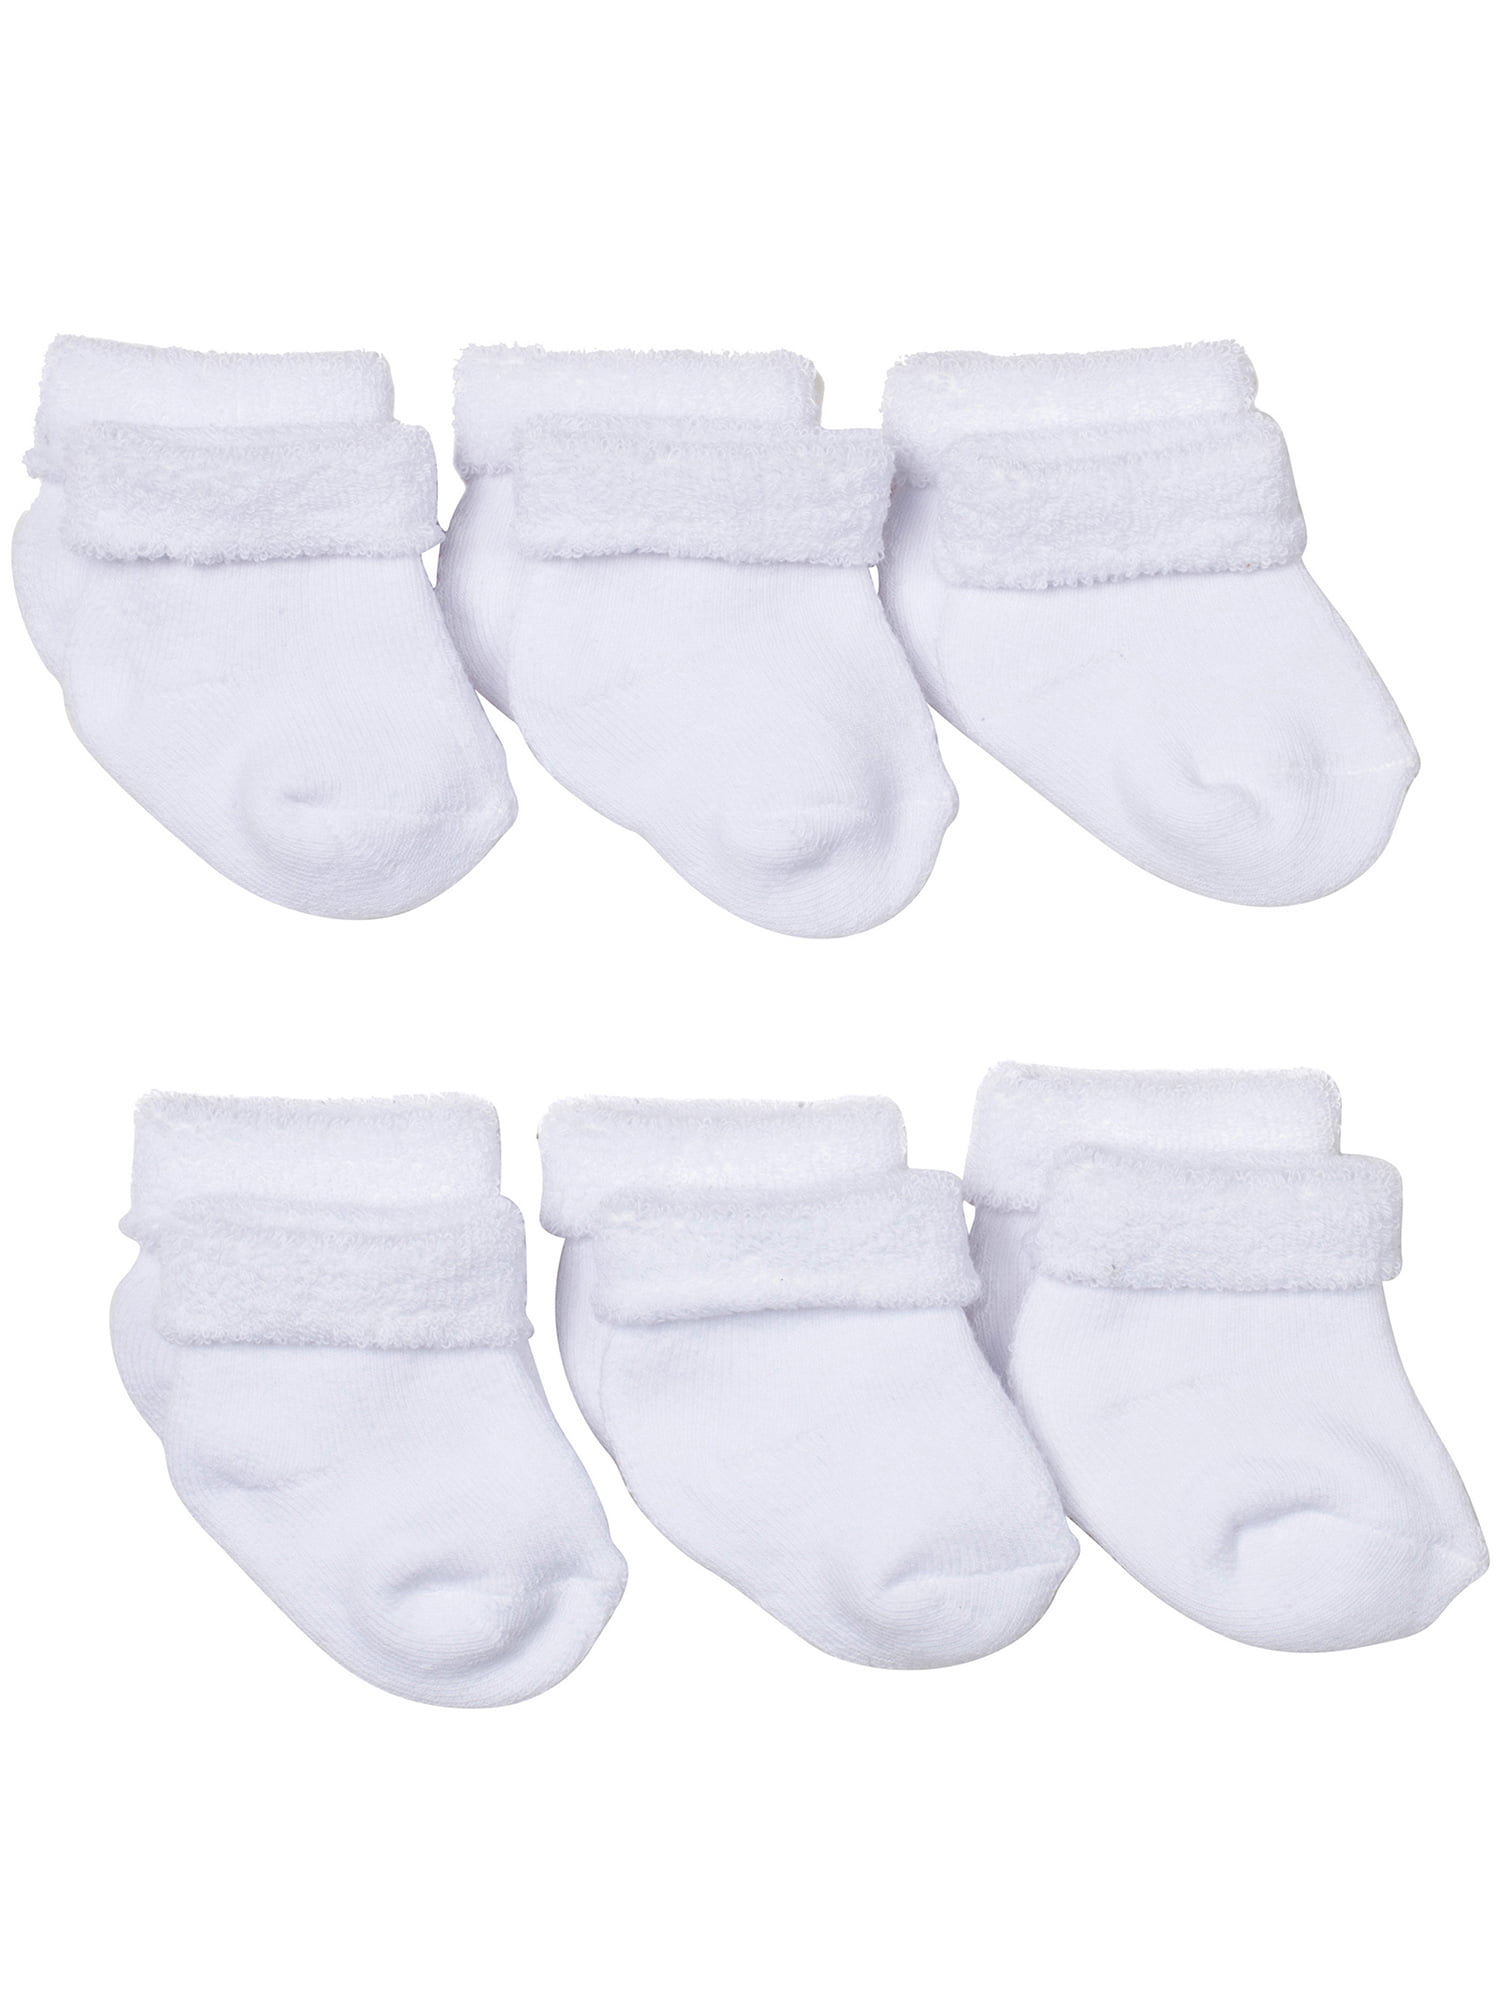 White Terry Bootie Socks, 6-Pack 